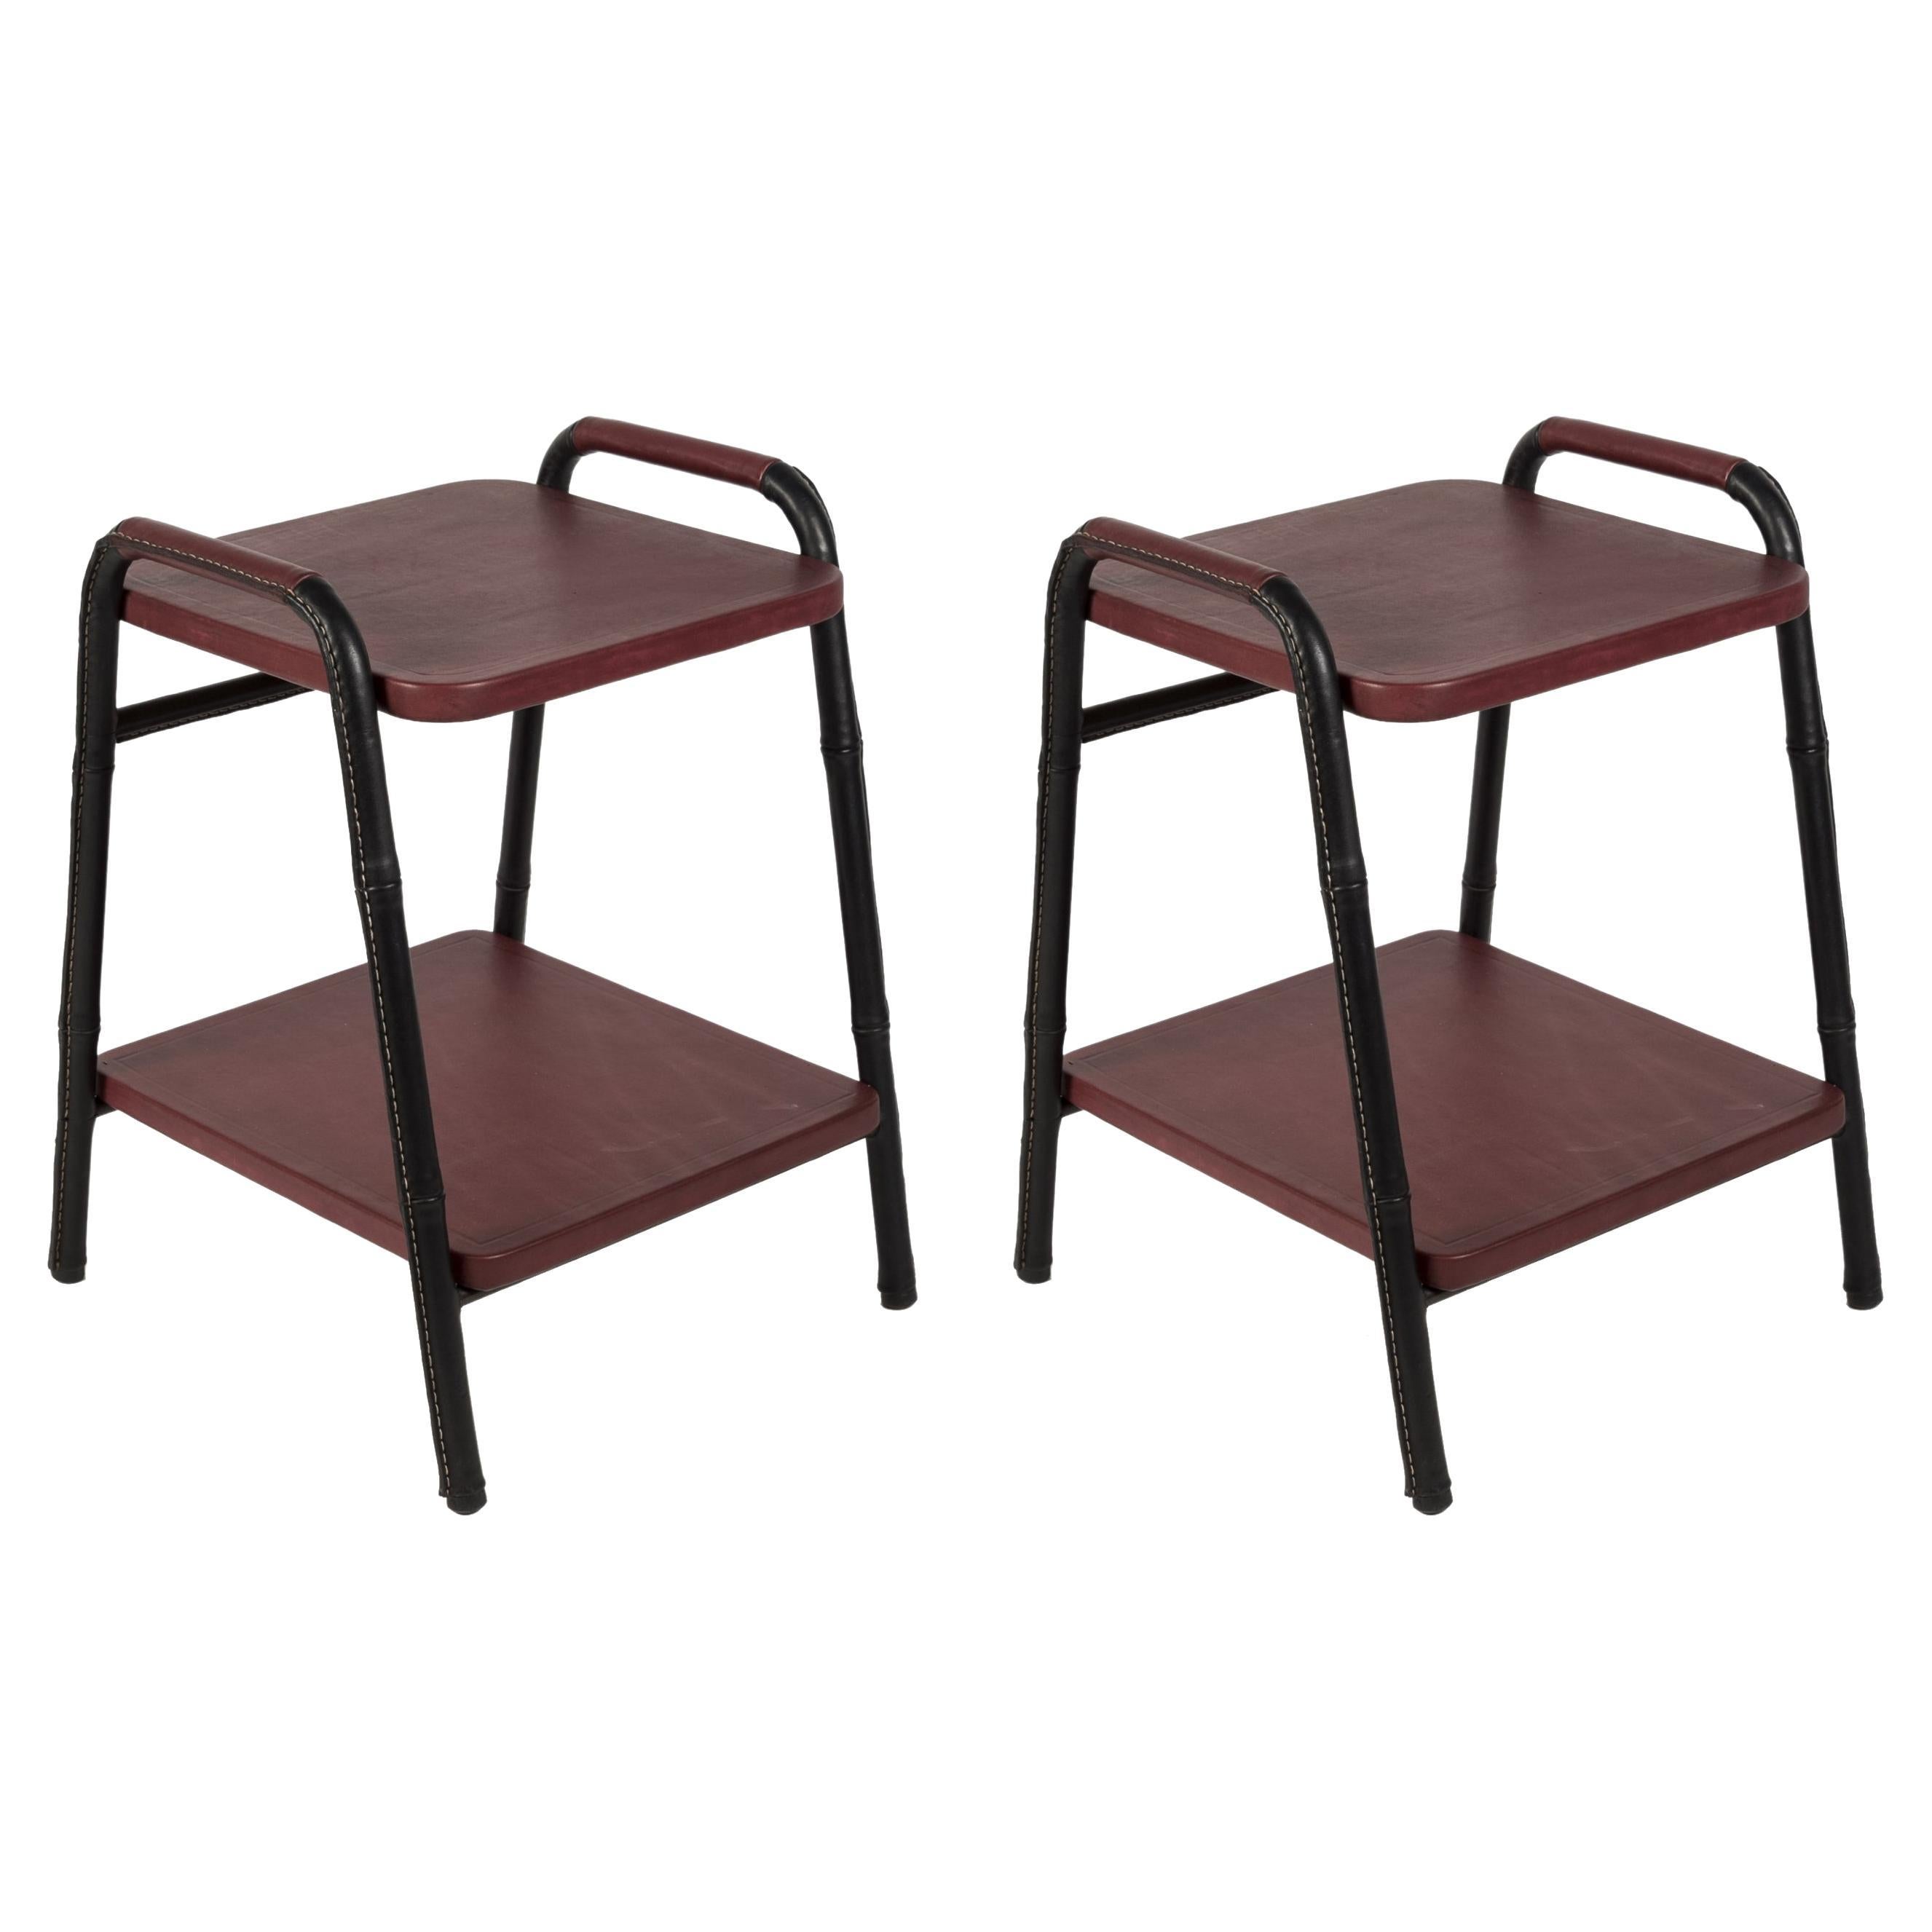 1950's Stitched Leather Side Tables by Jacques Adnet